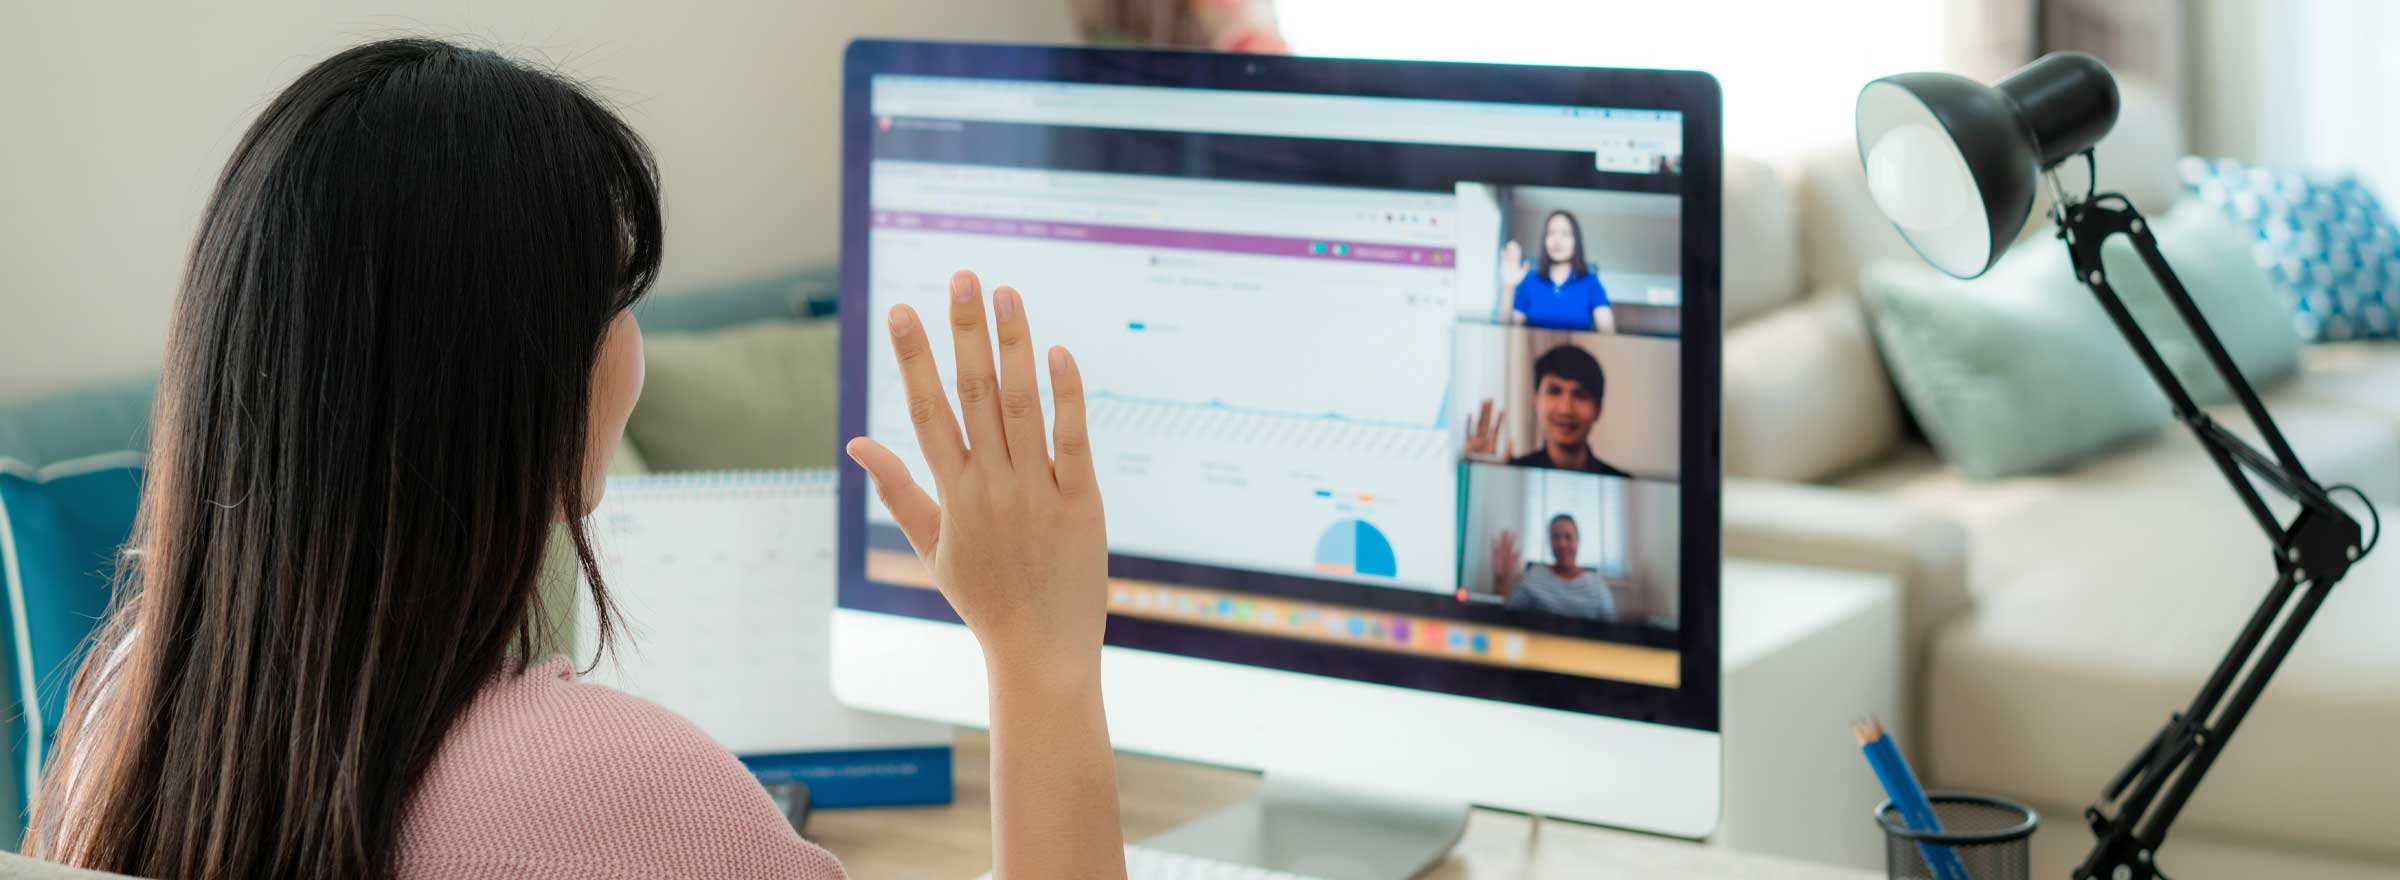 four people waving at each other in a video conference